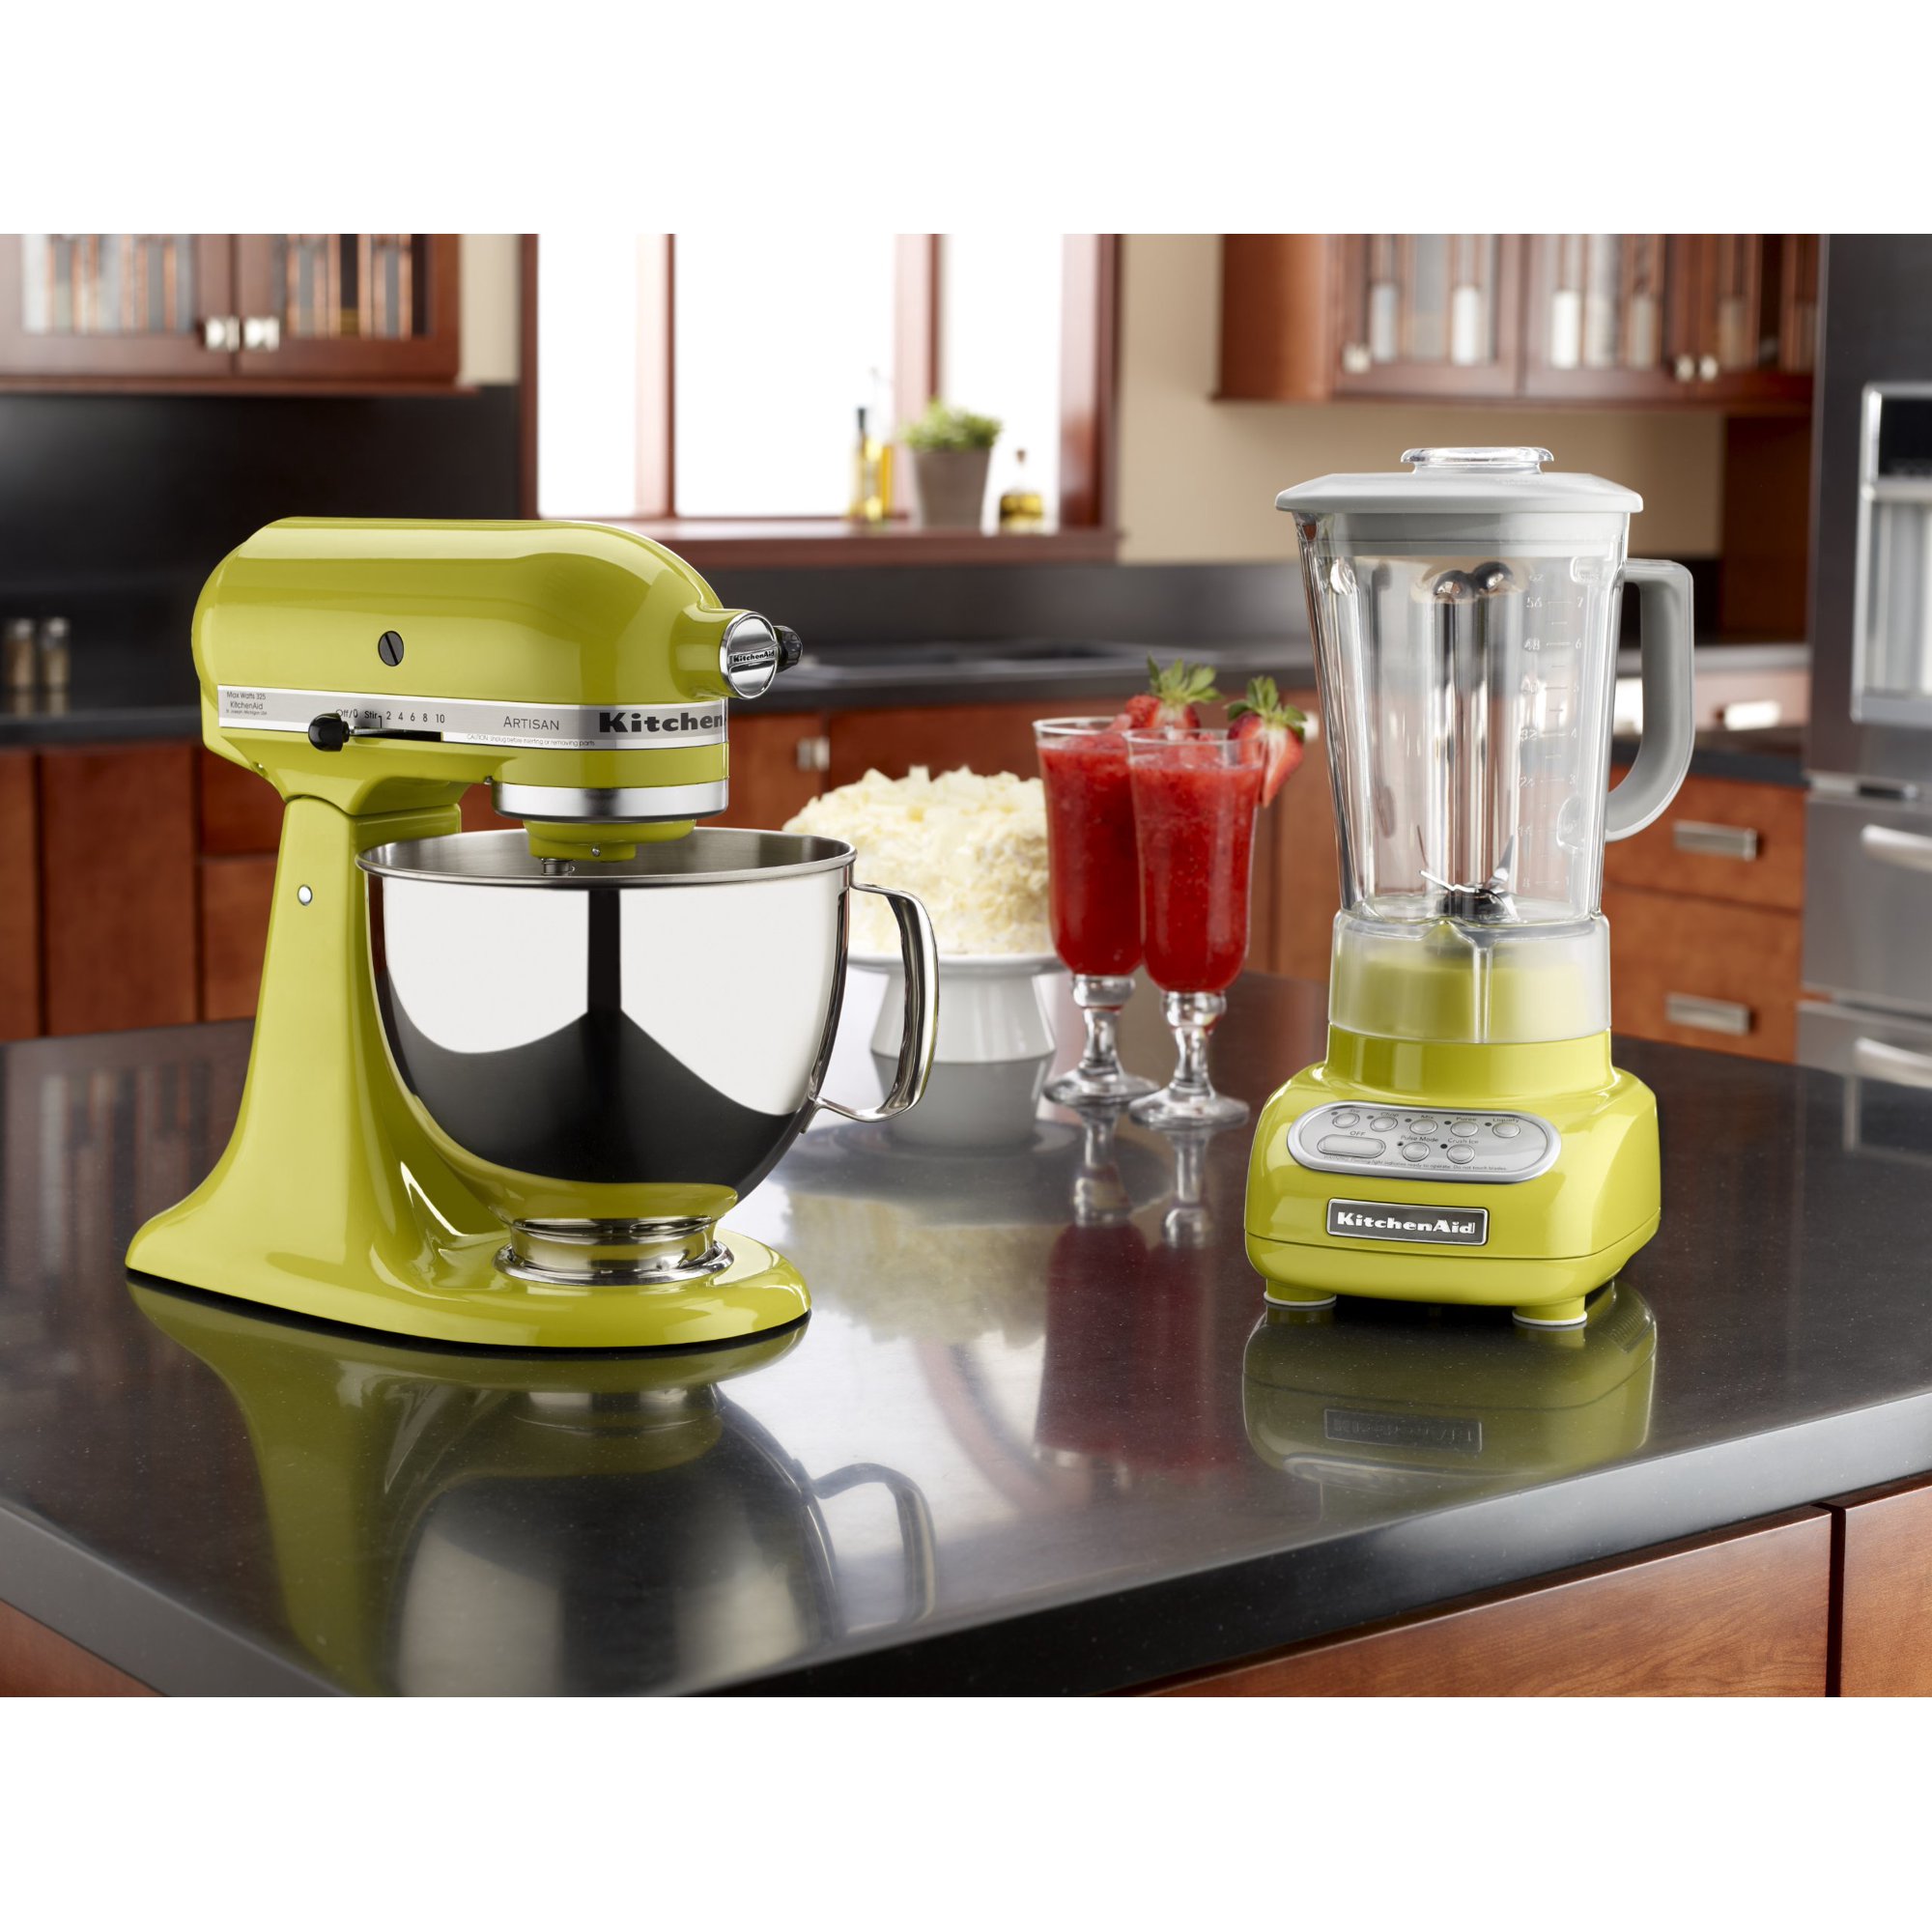 https://themarketdepot.com/wp-content/uploads/2023/01/KitchenAid-KSM150PSPE-Artisan-Series-5-Qt.-Stand-Mixer-with-Pouring-Shield-Pear-1.jpeg